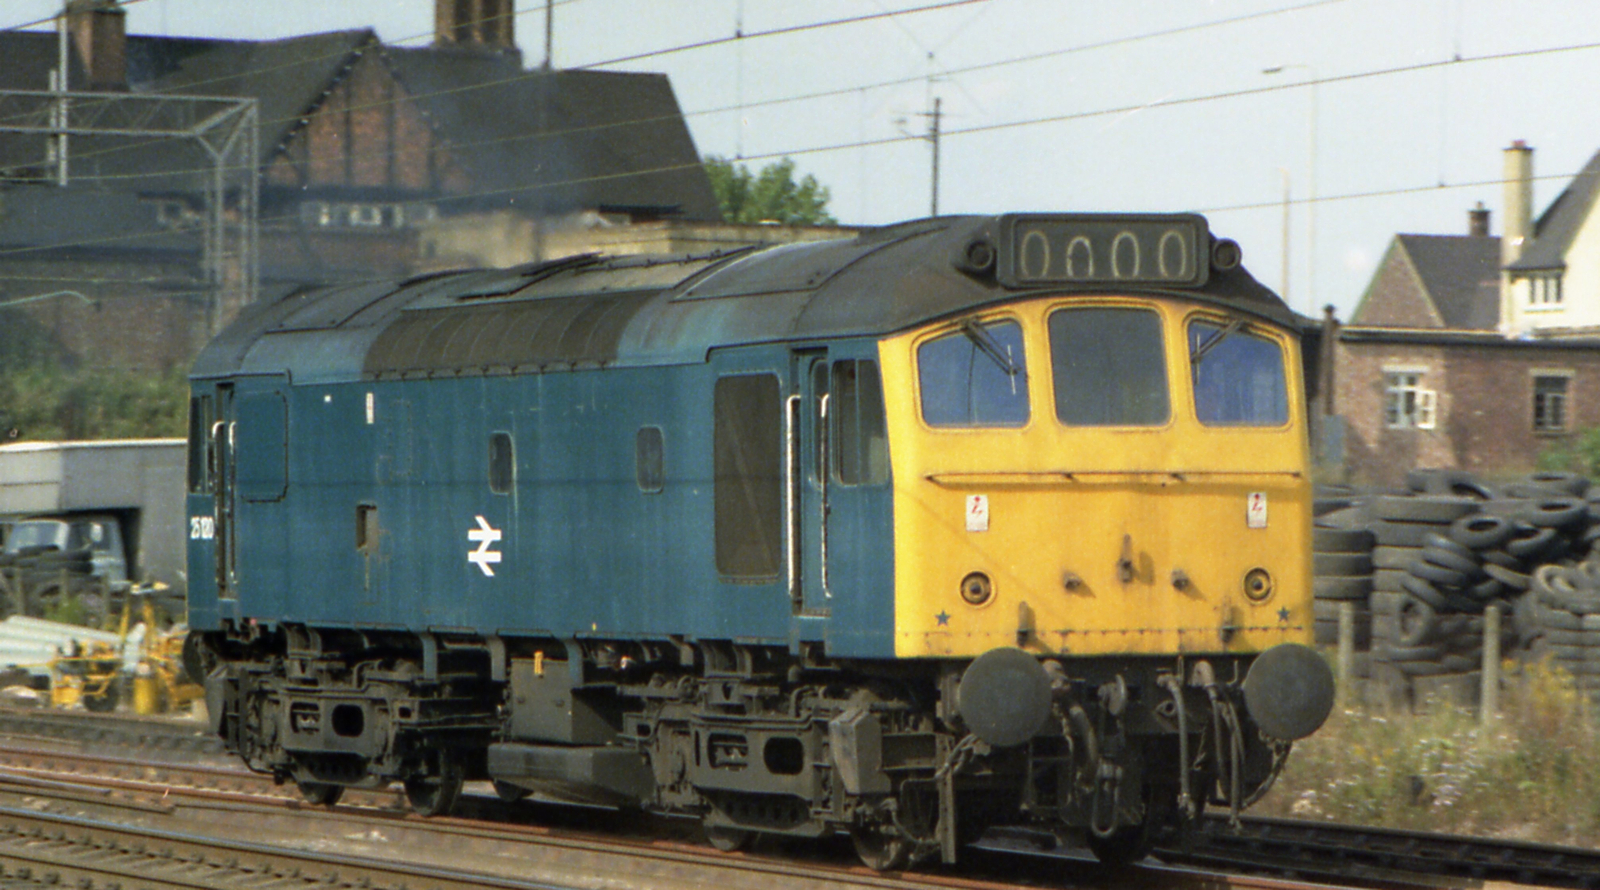 25120 in the late 1970's in Kenton